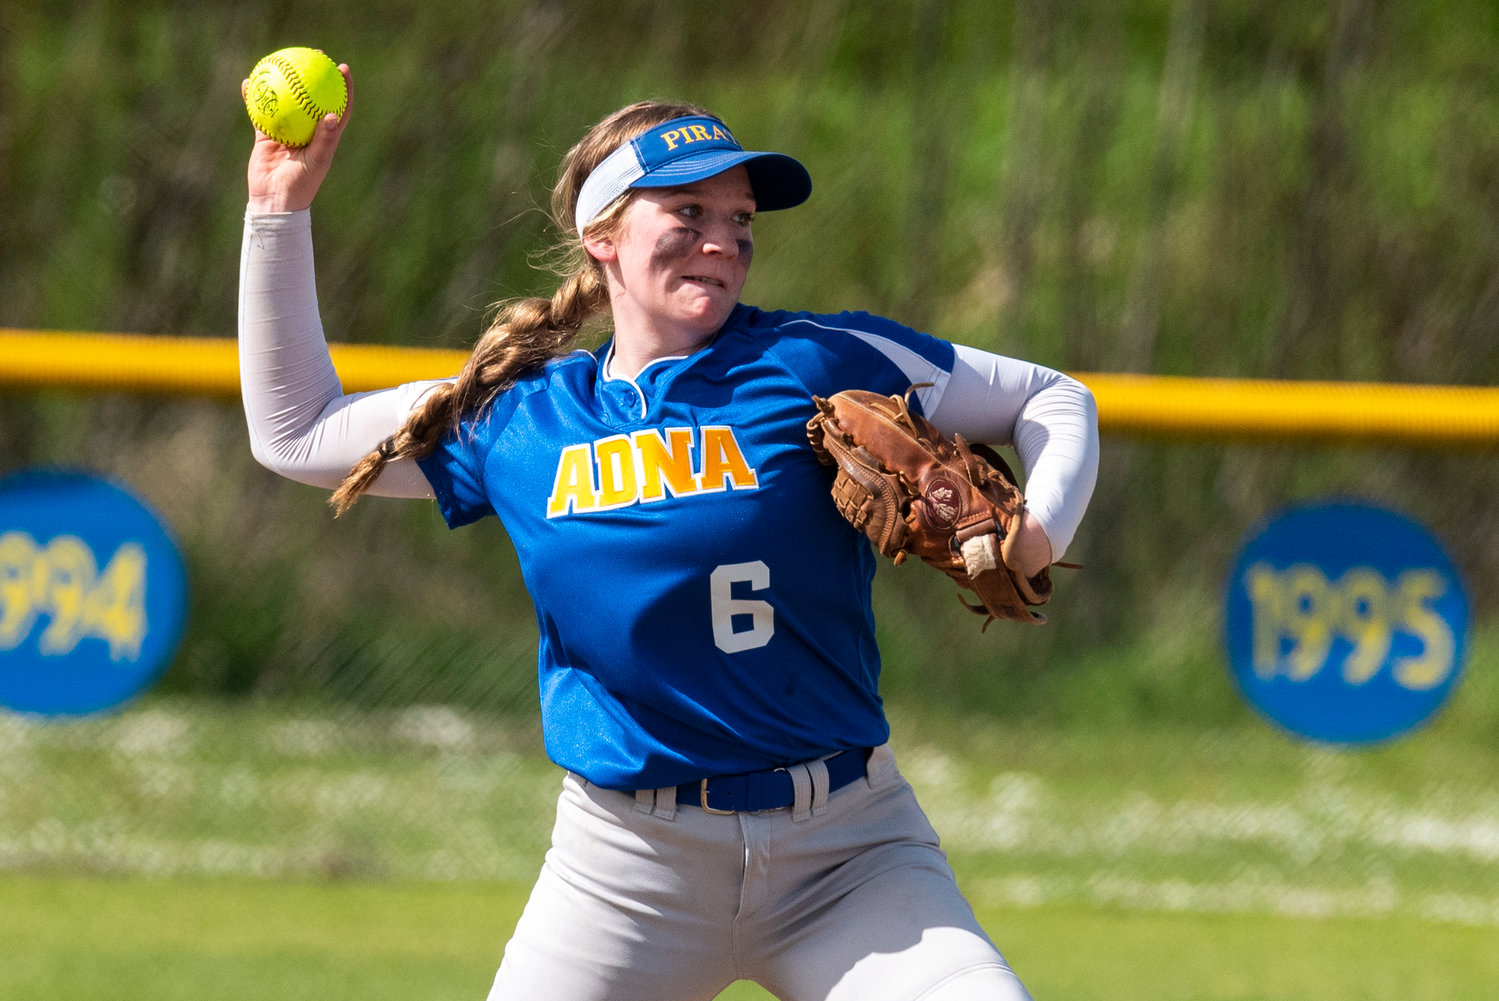 Adna shorstop Kendall Humphrey makes a throw to first during a home game against Onalaska on May 4.